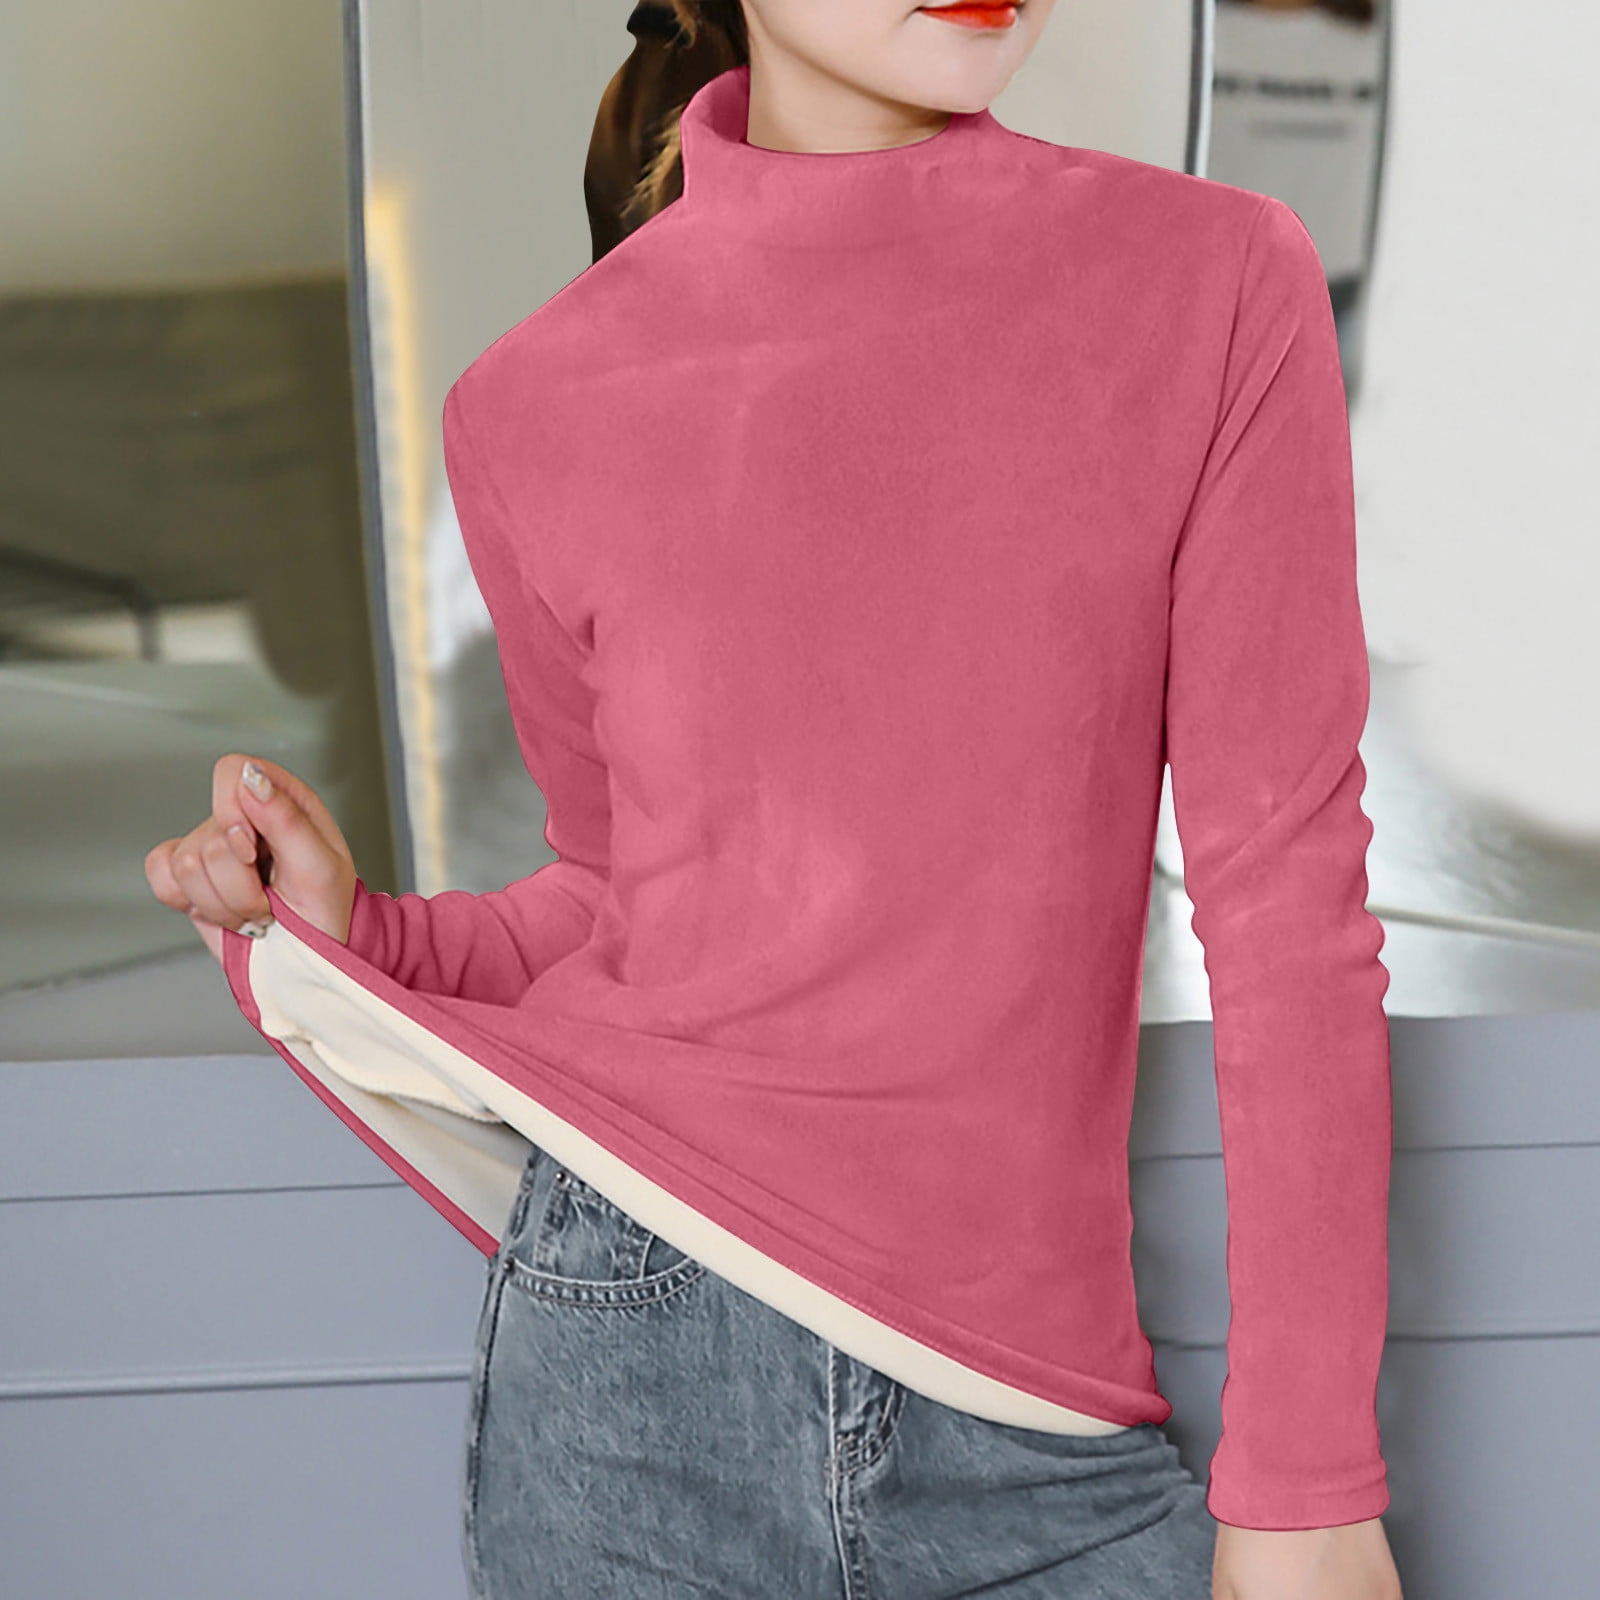 Wyongtao Thermal Shirts for Women Base Layer Ultra Soft Fleece